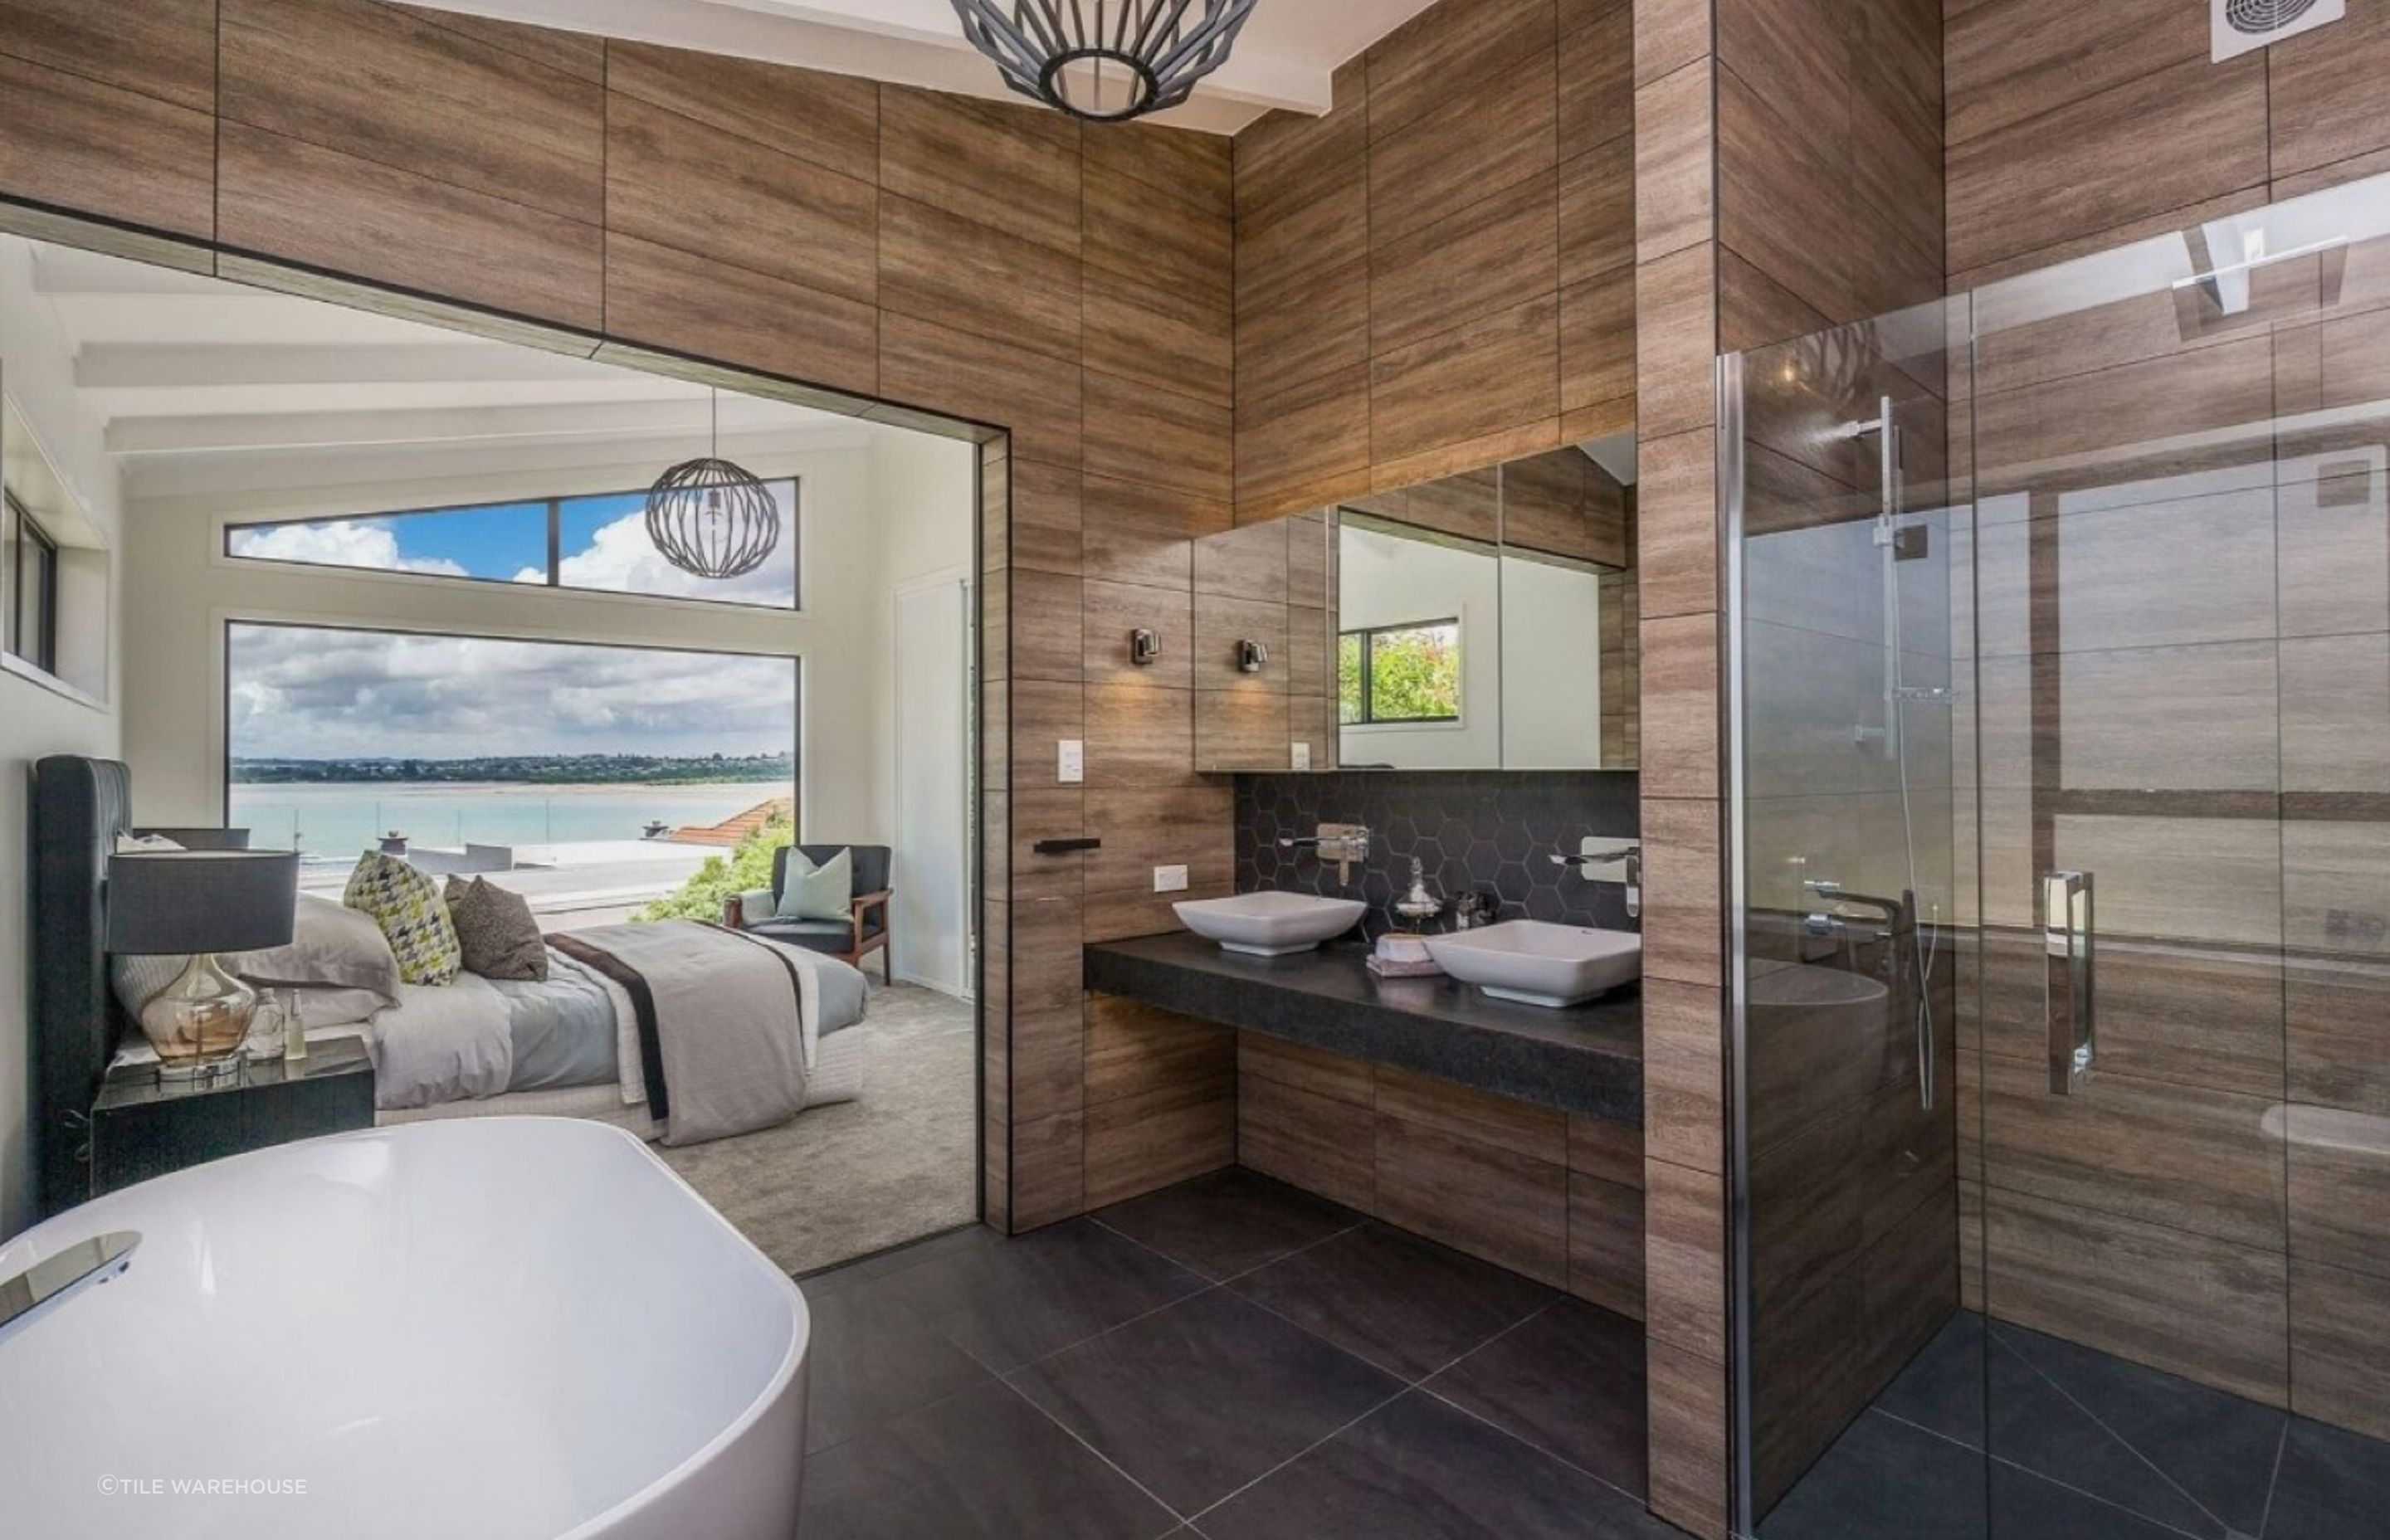 The large format Heartwood Floor Tiles help increase the sense of space in this stylish ensuite.